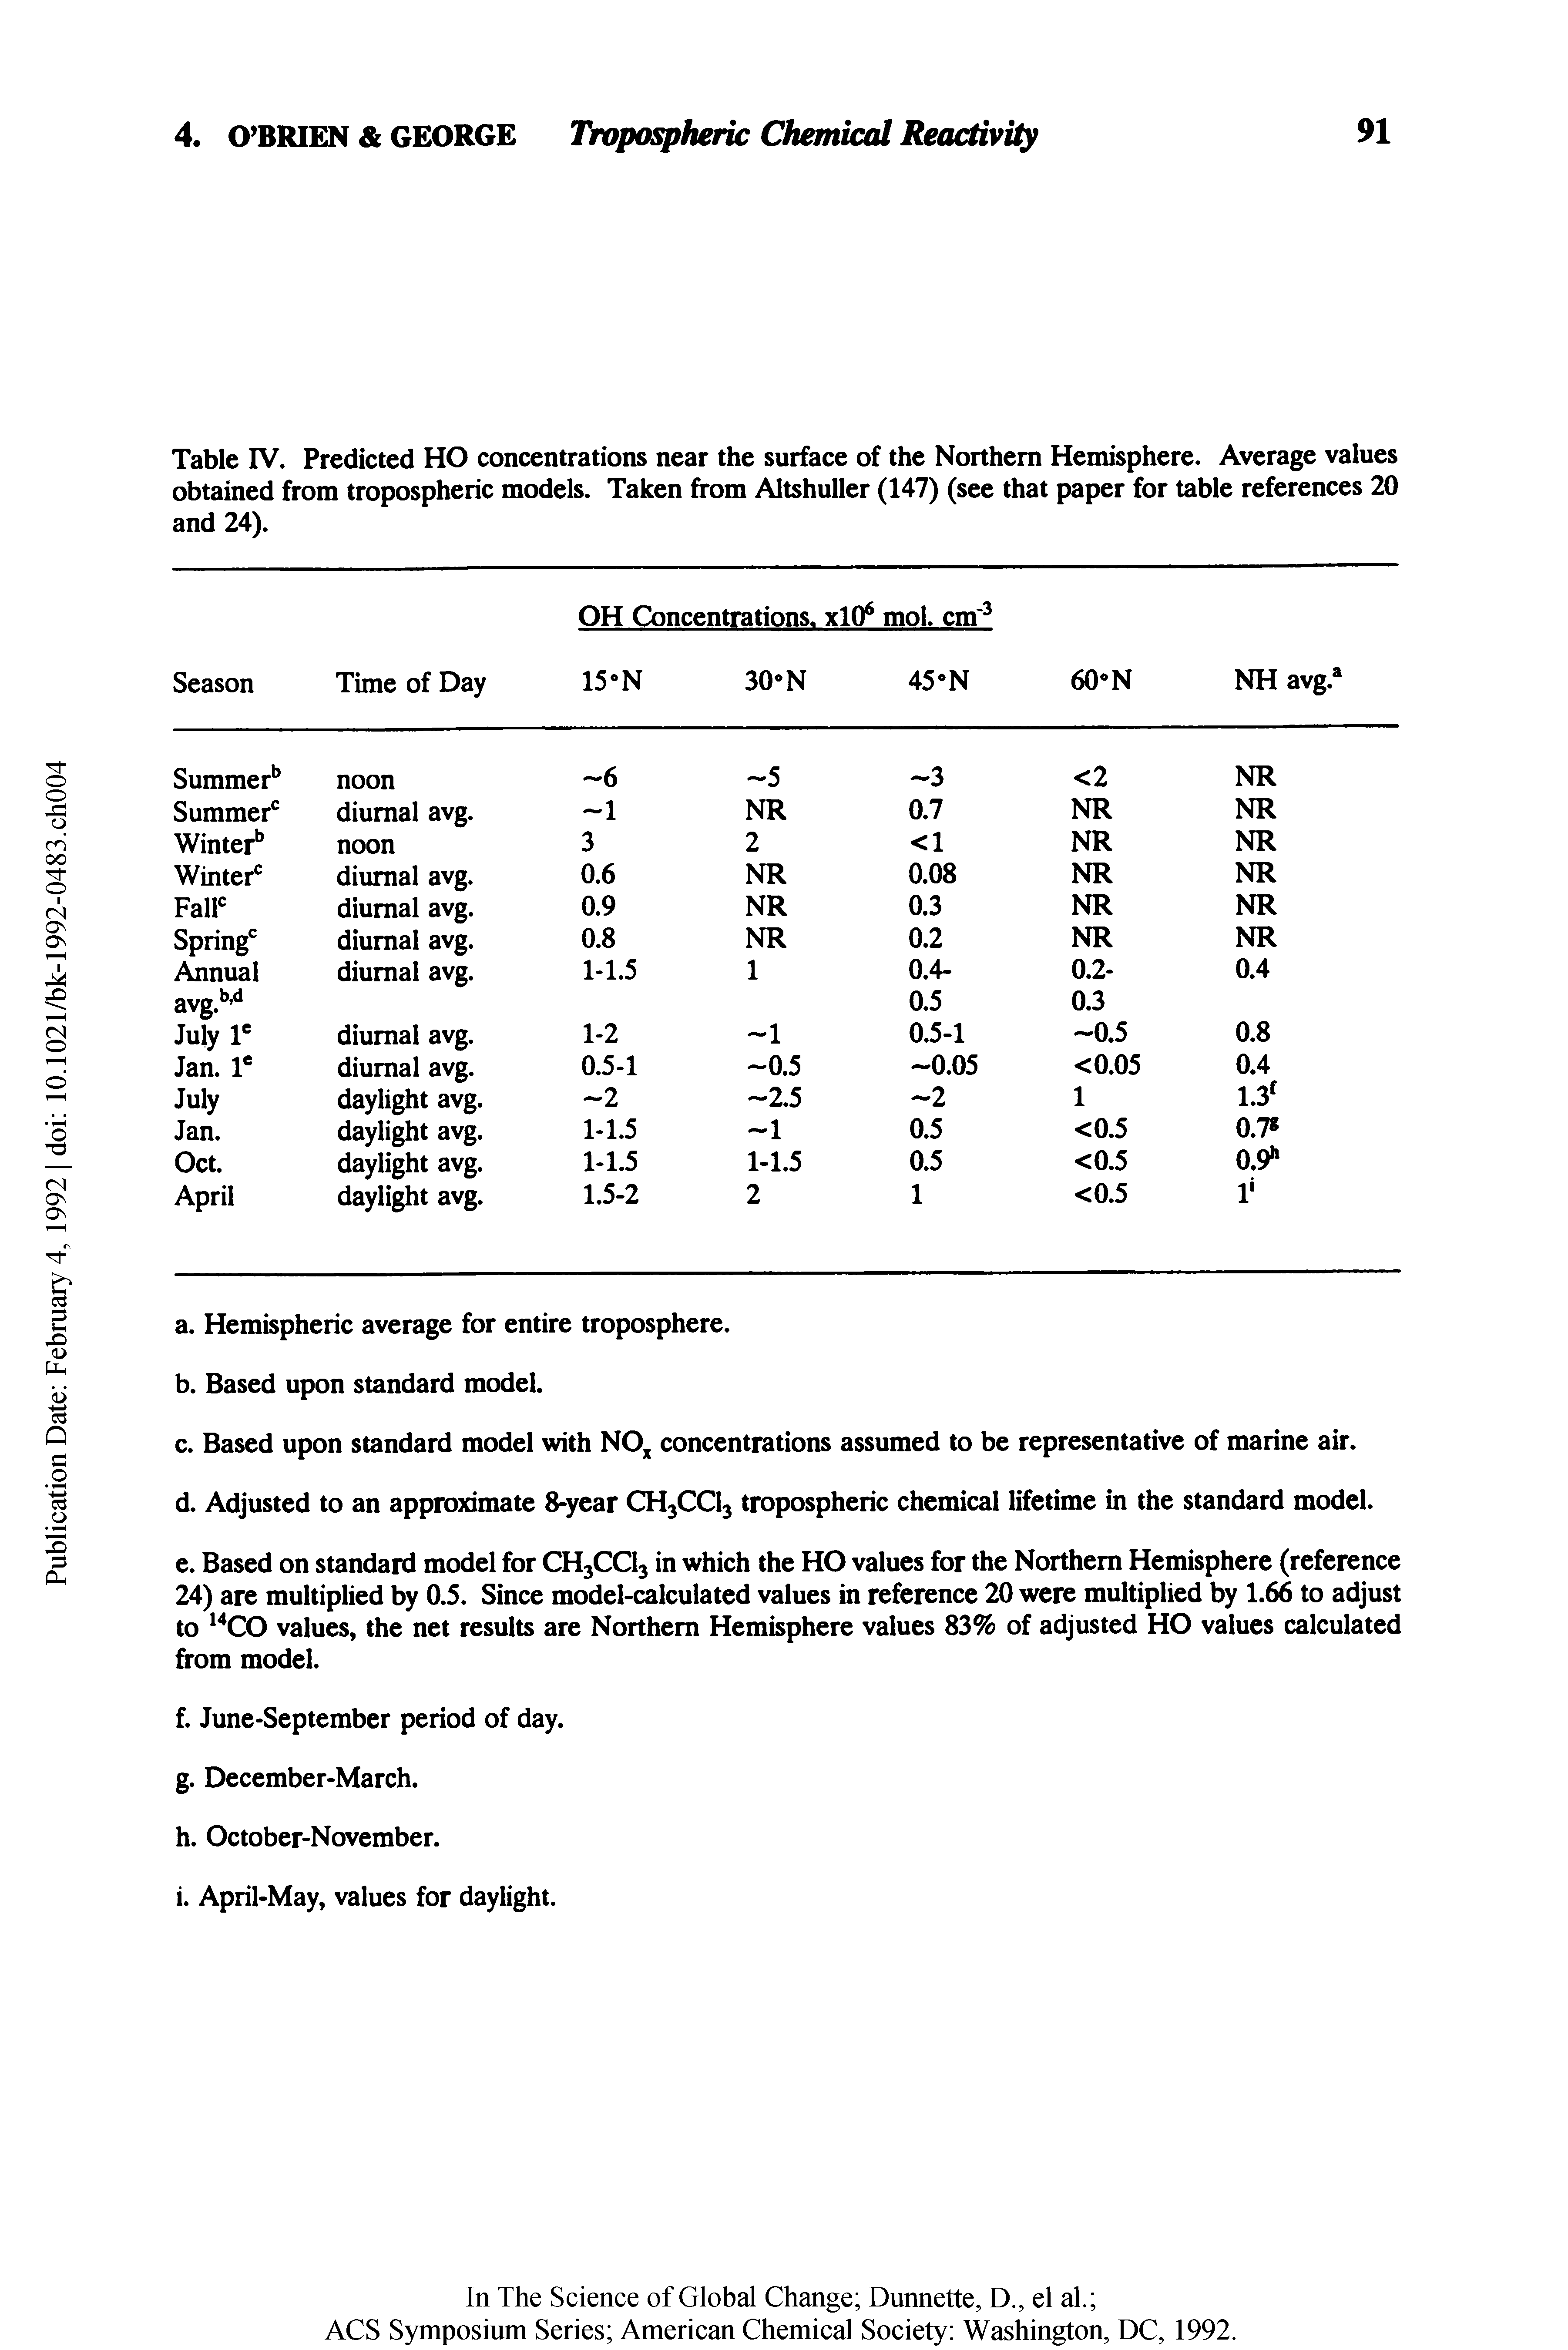 Table IV. Predicted HO concentrations near the surface of the Northern Hemisphere. Average values obtained from tropospheric models. Taken from Altshuller (147) (see that paper for table references 20 and 24).